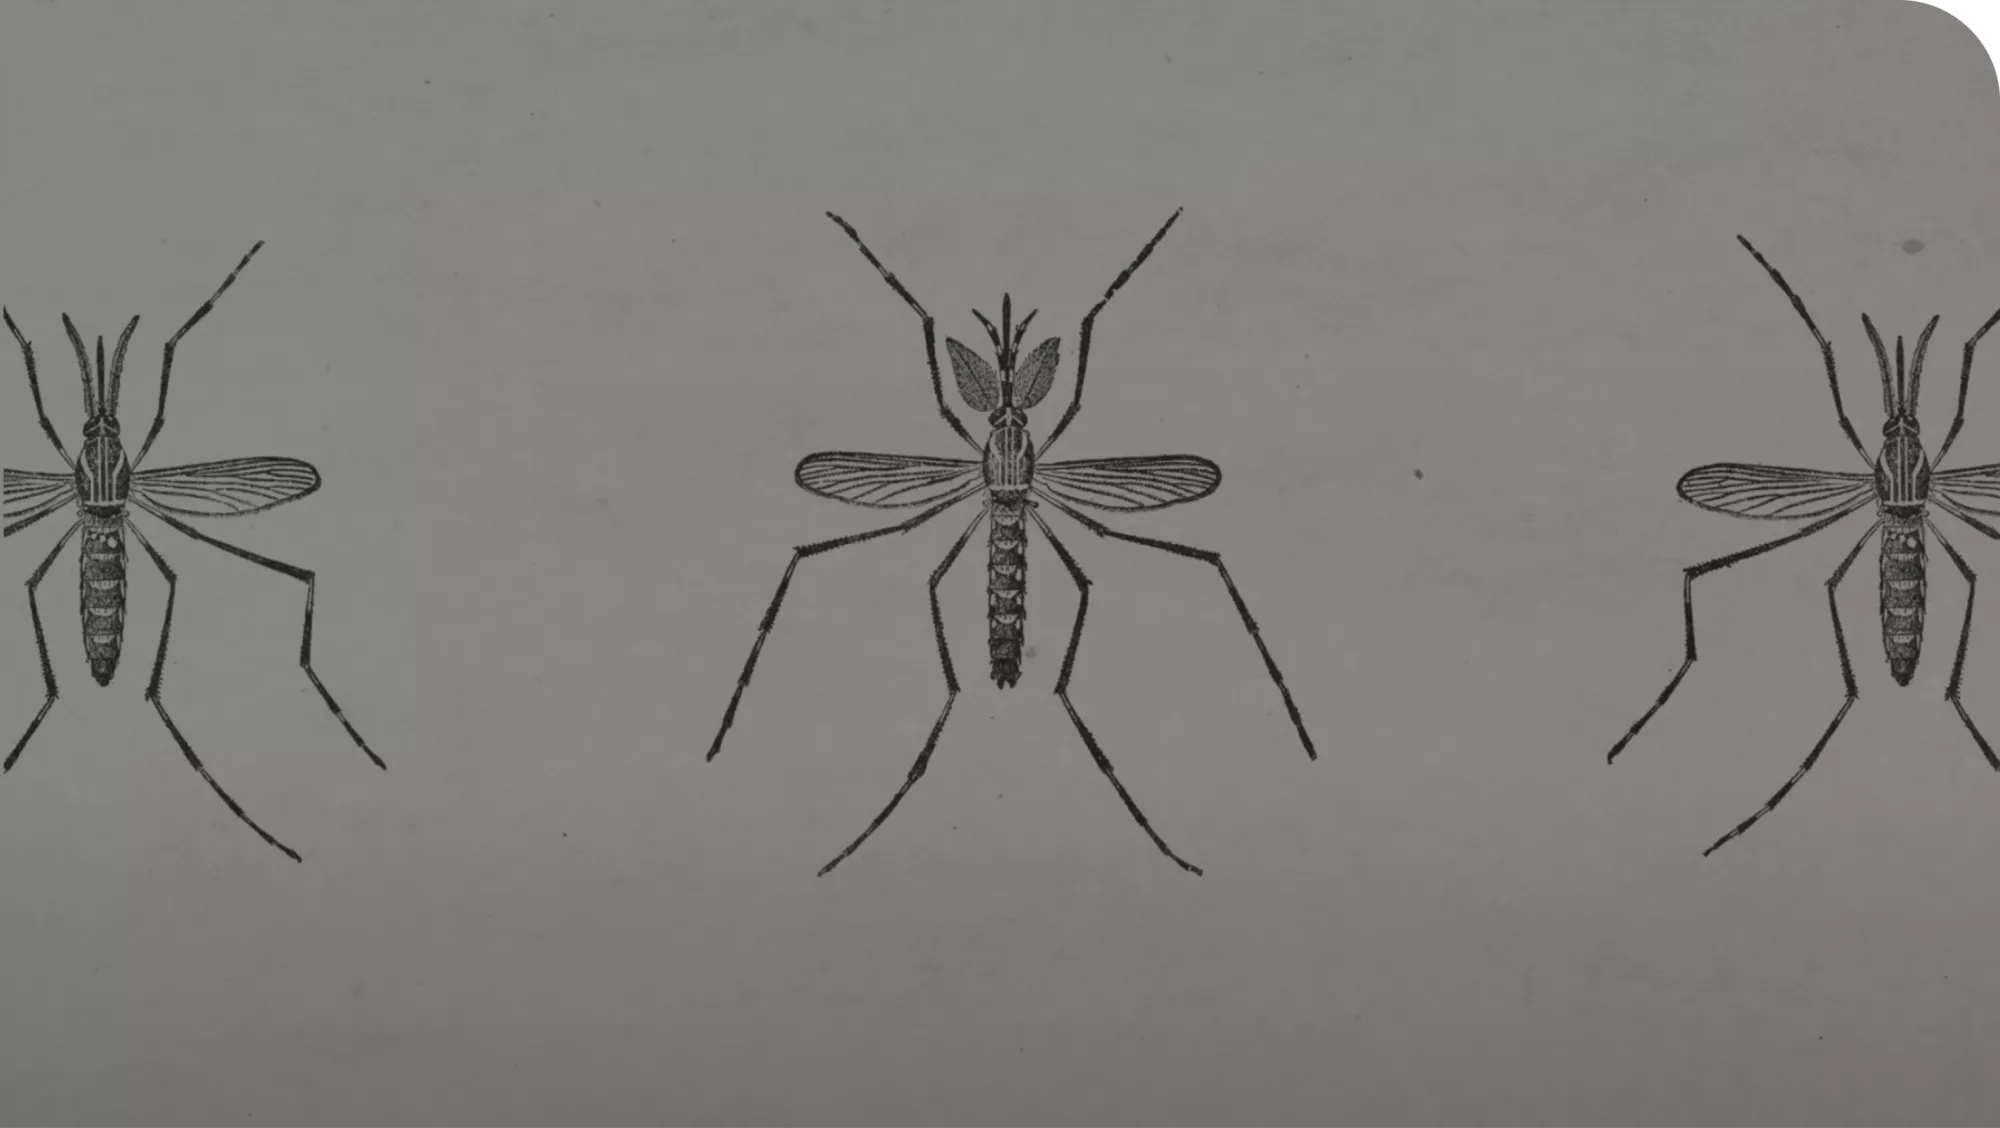 Illustration of the Aedes aegypti species